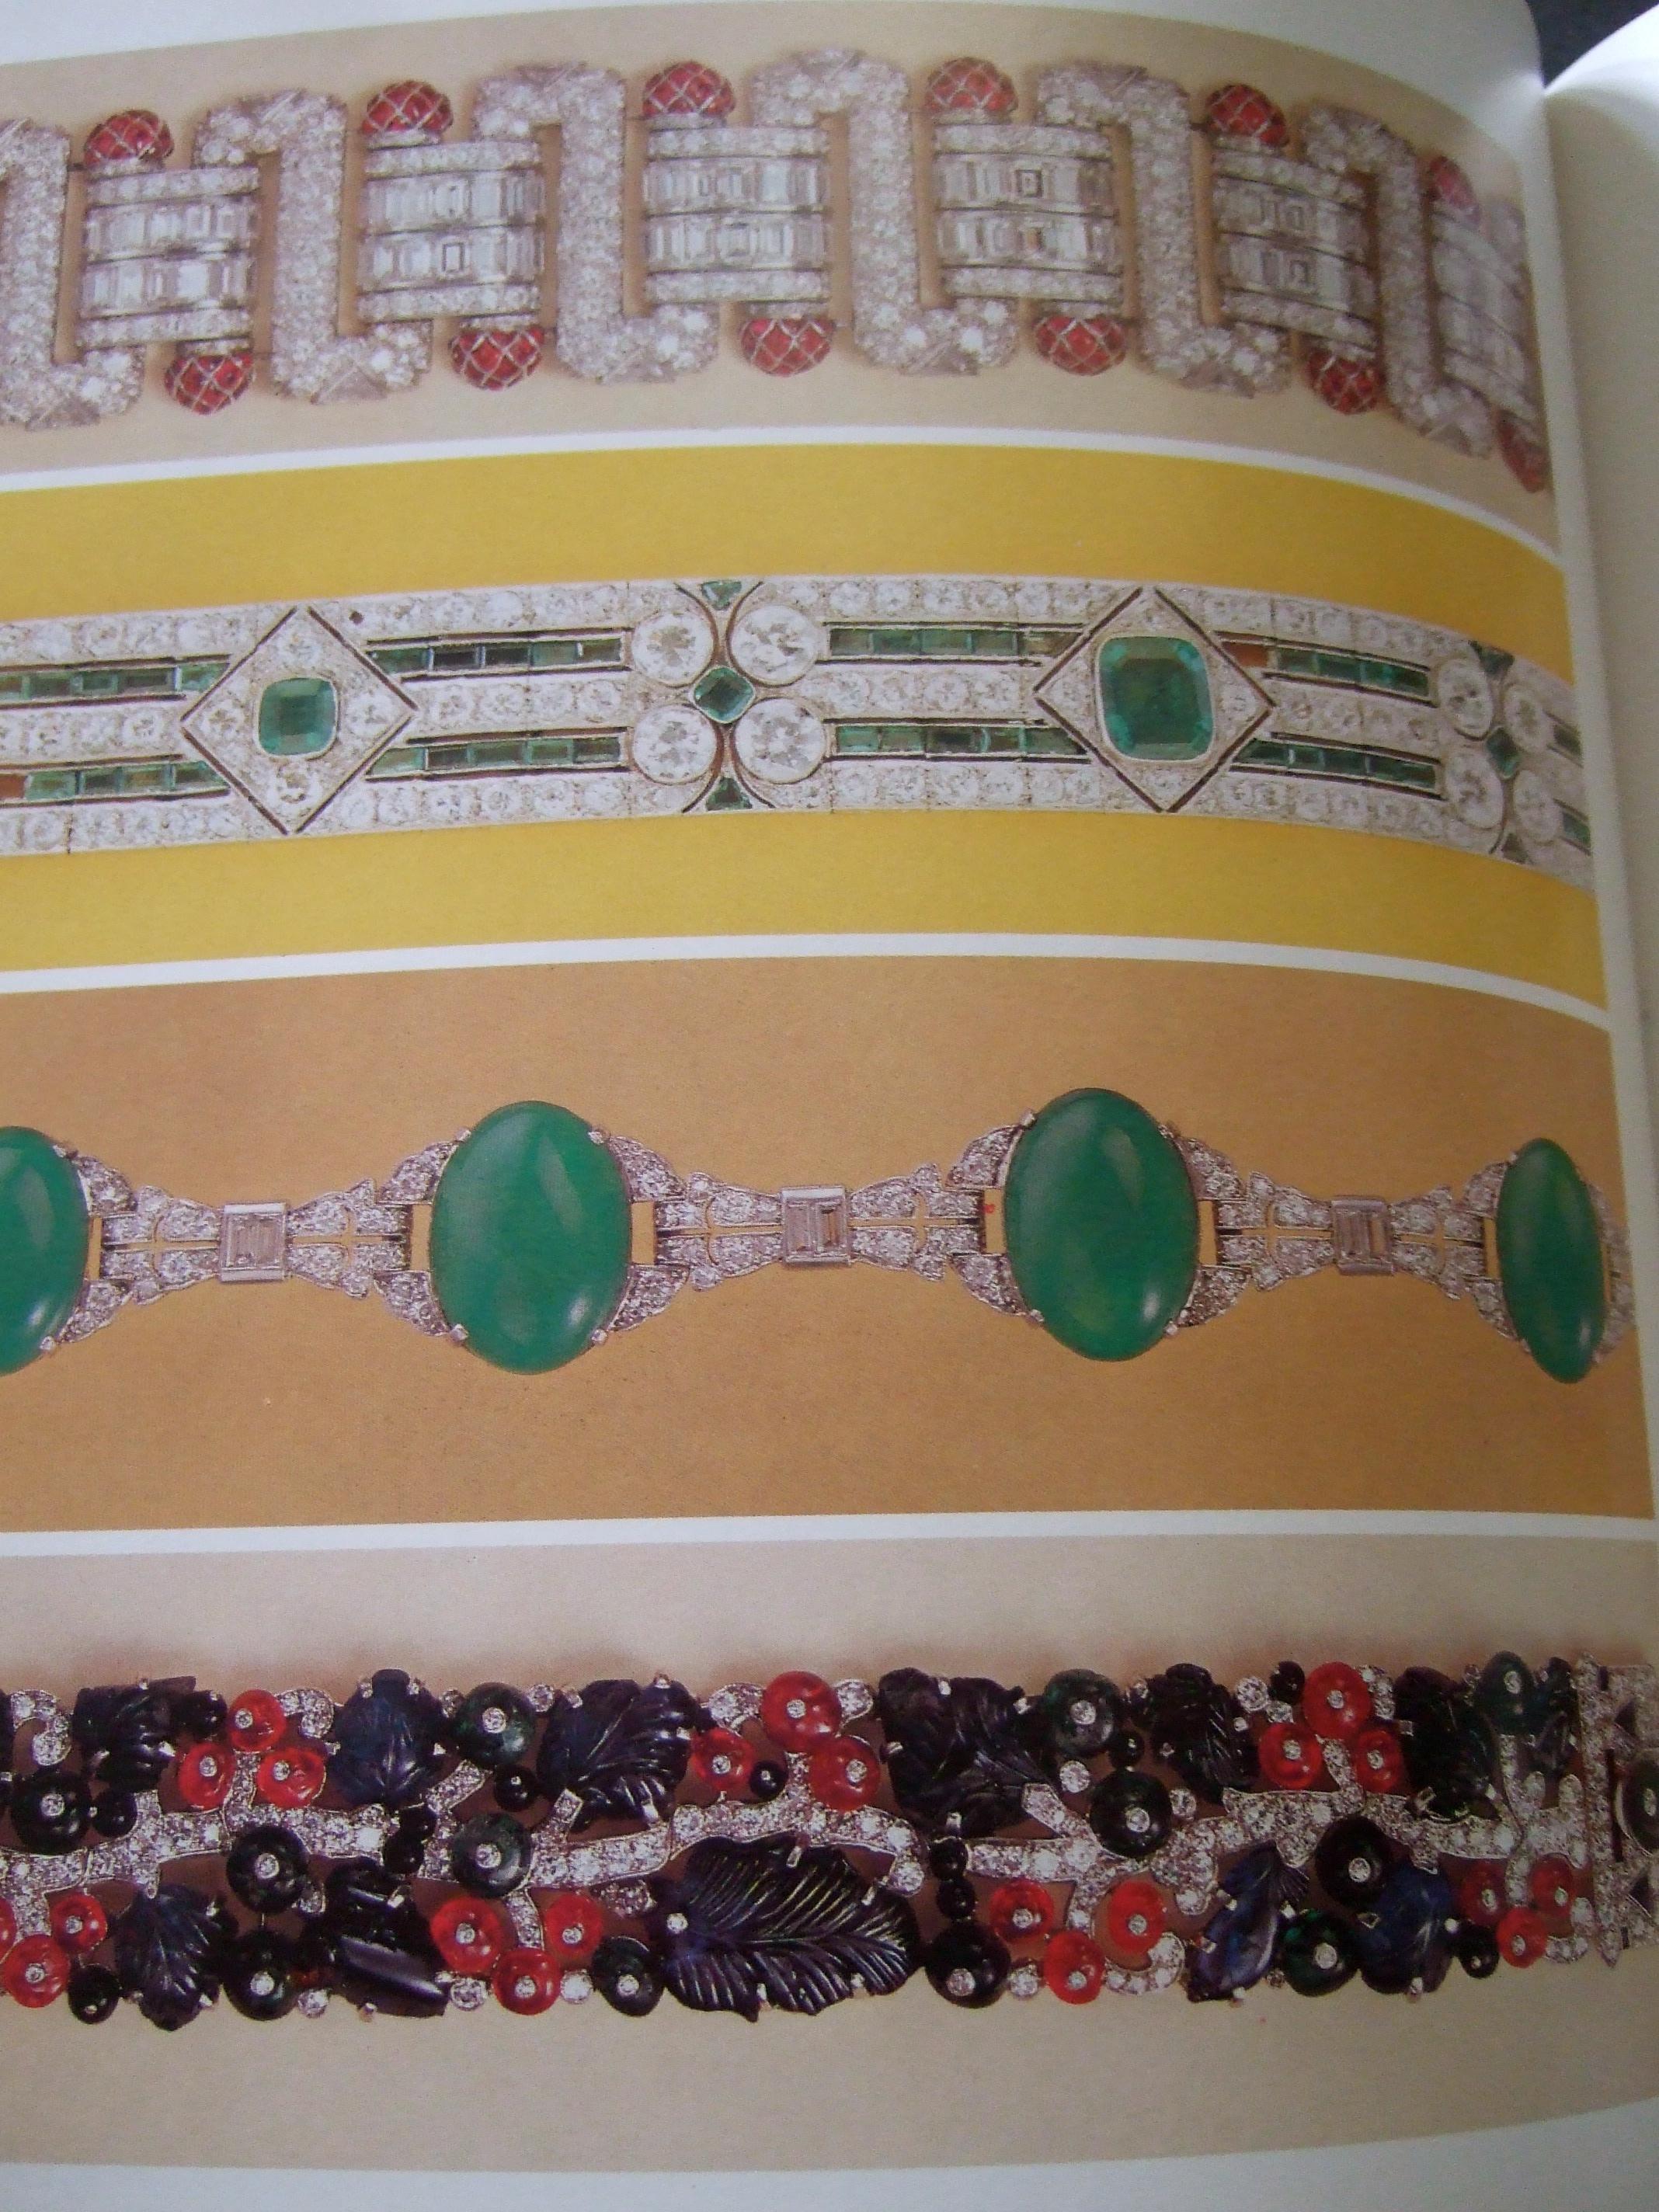 Rare Hard Cover Art Deco Jewelry Book from Rizzoli by Sylvie Raulet c 1984  For Sale 11